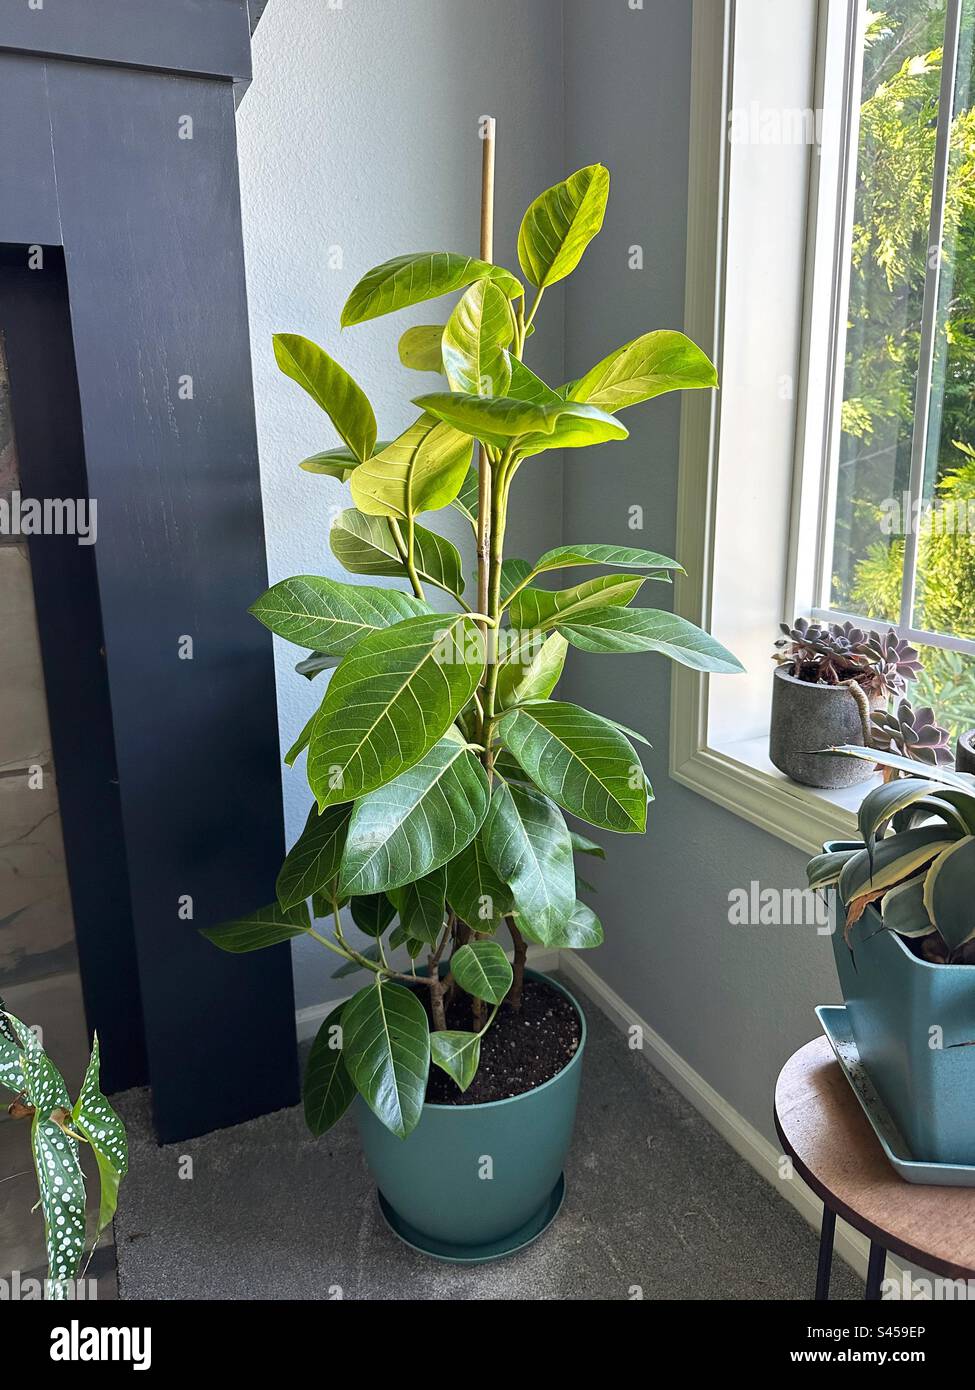 A Ficus altissima plant next to other plants in a home next to a window. Stock Photo